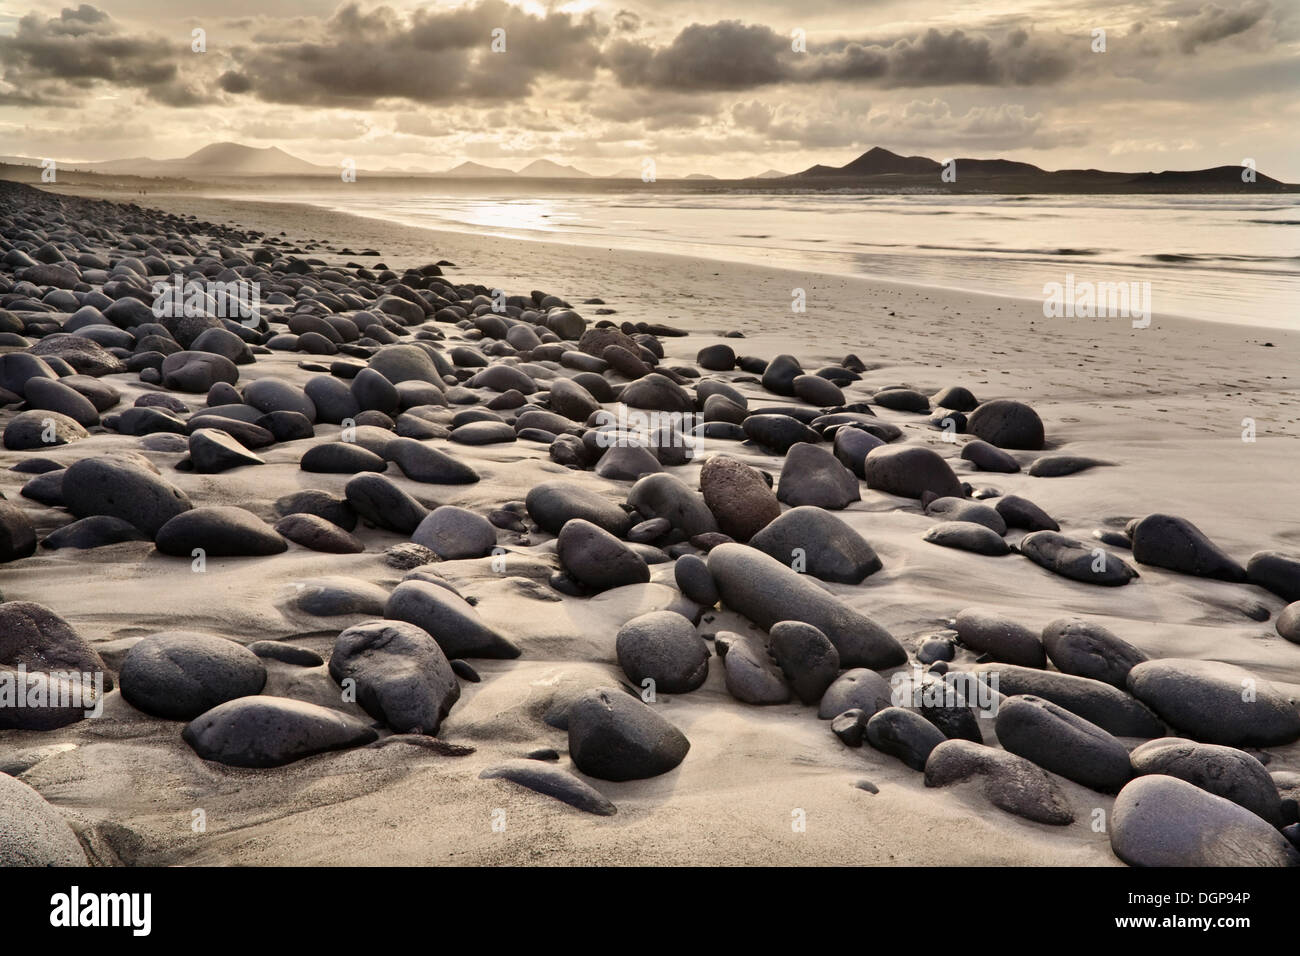 Stones and rocks polished smooth by the sea at Famara Beach, Lanzarote, Canary Islands, Spain, Europe Stock Photo